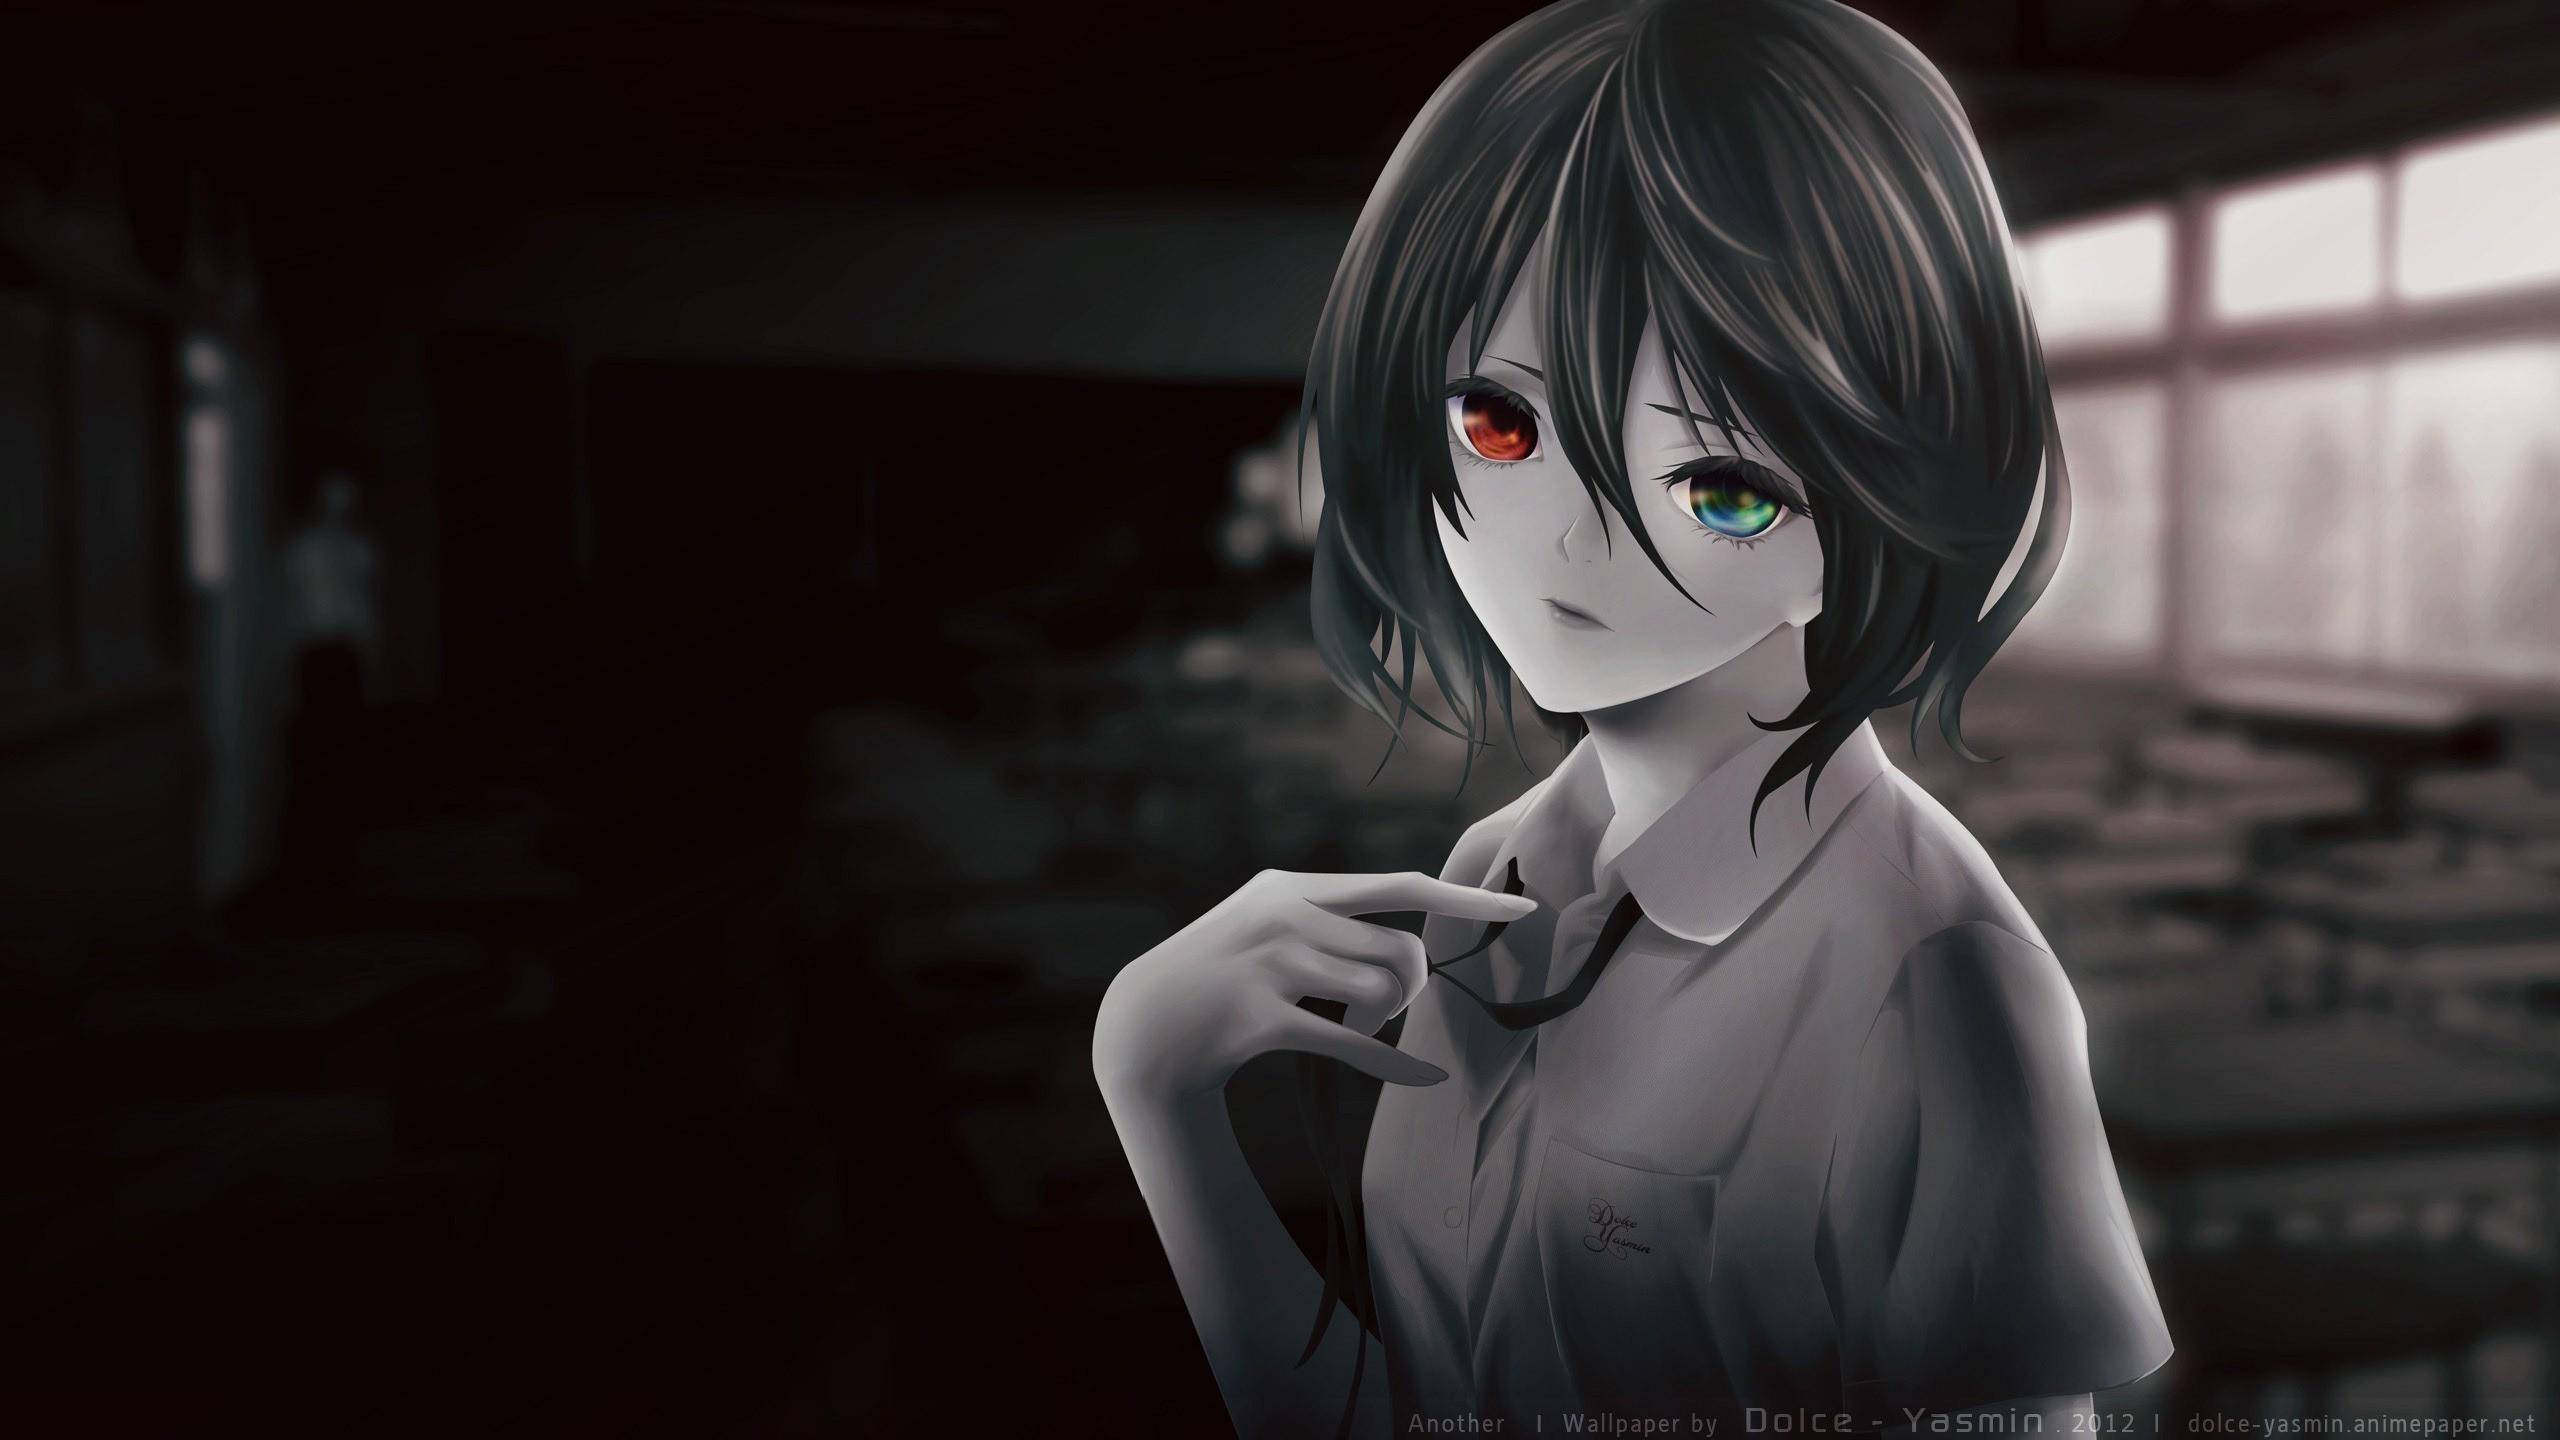 Wallpaper pose, the dark background, anime, gesture, anime, monochrome,  green eyes, monochrome for mobile and desktop, section сёнэн, resolution  1920x1080 - download